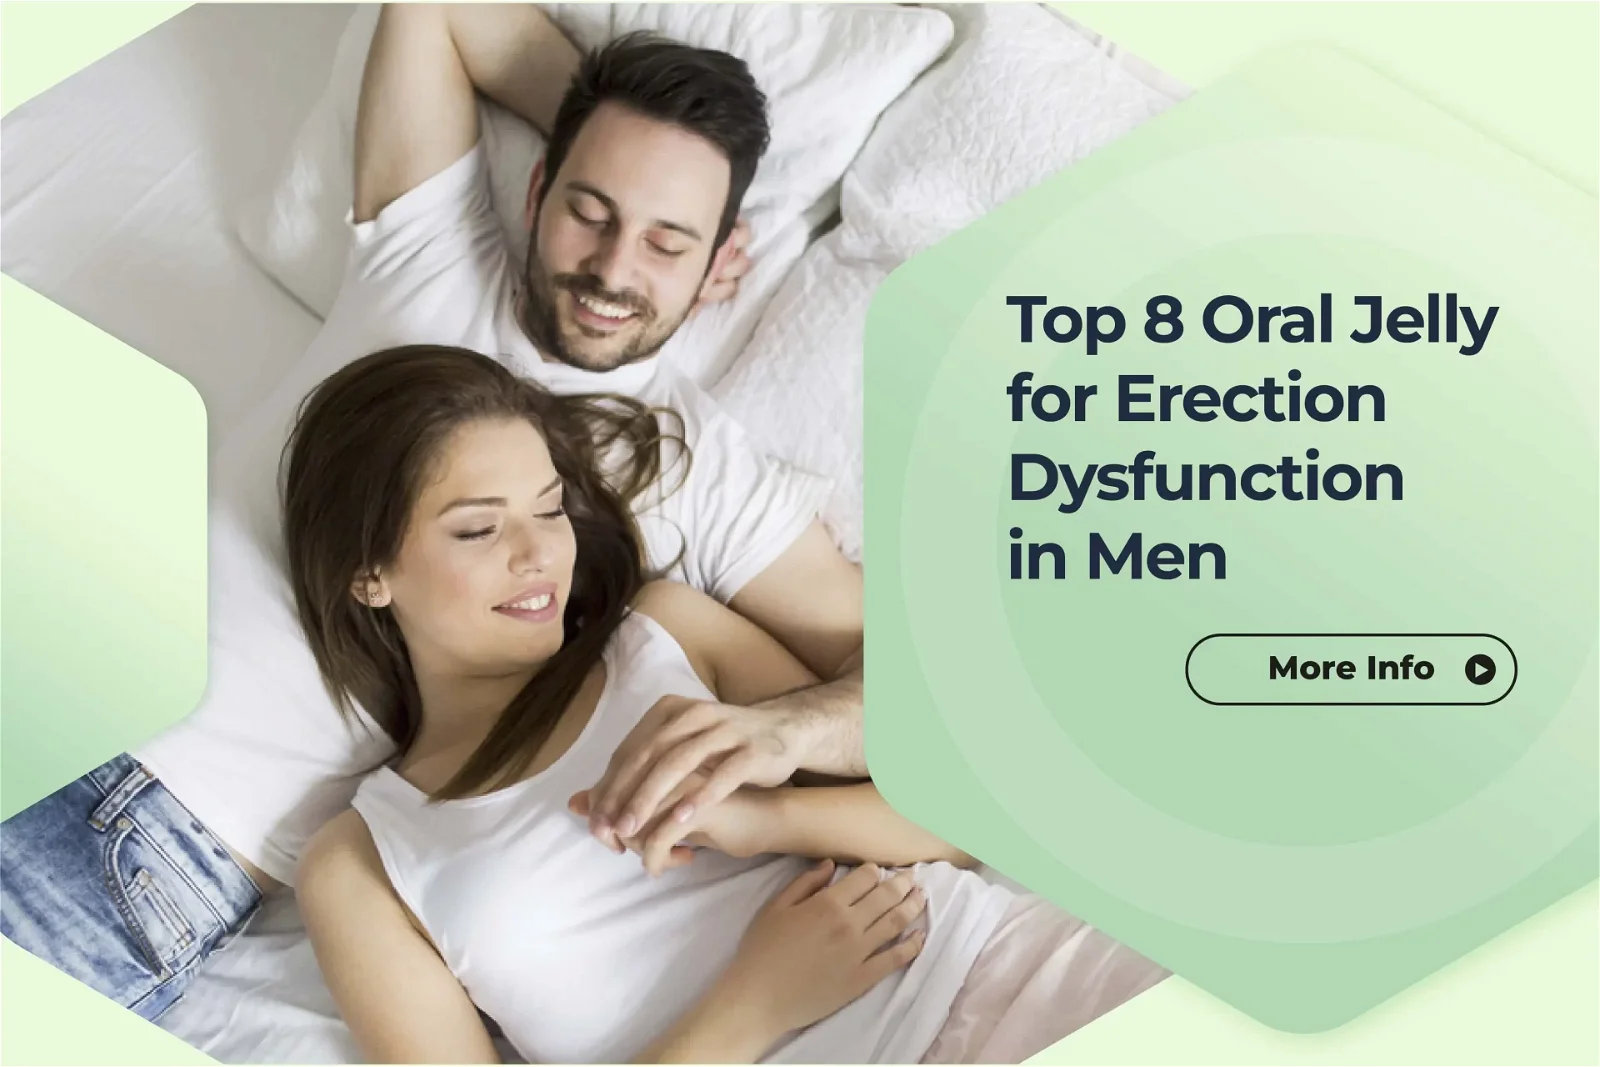 Top 8 Oral Jelly for Erection Dysfunction in Men